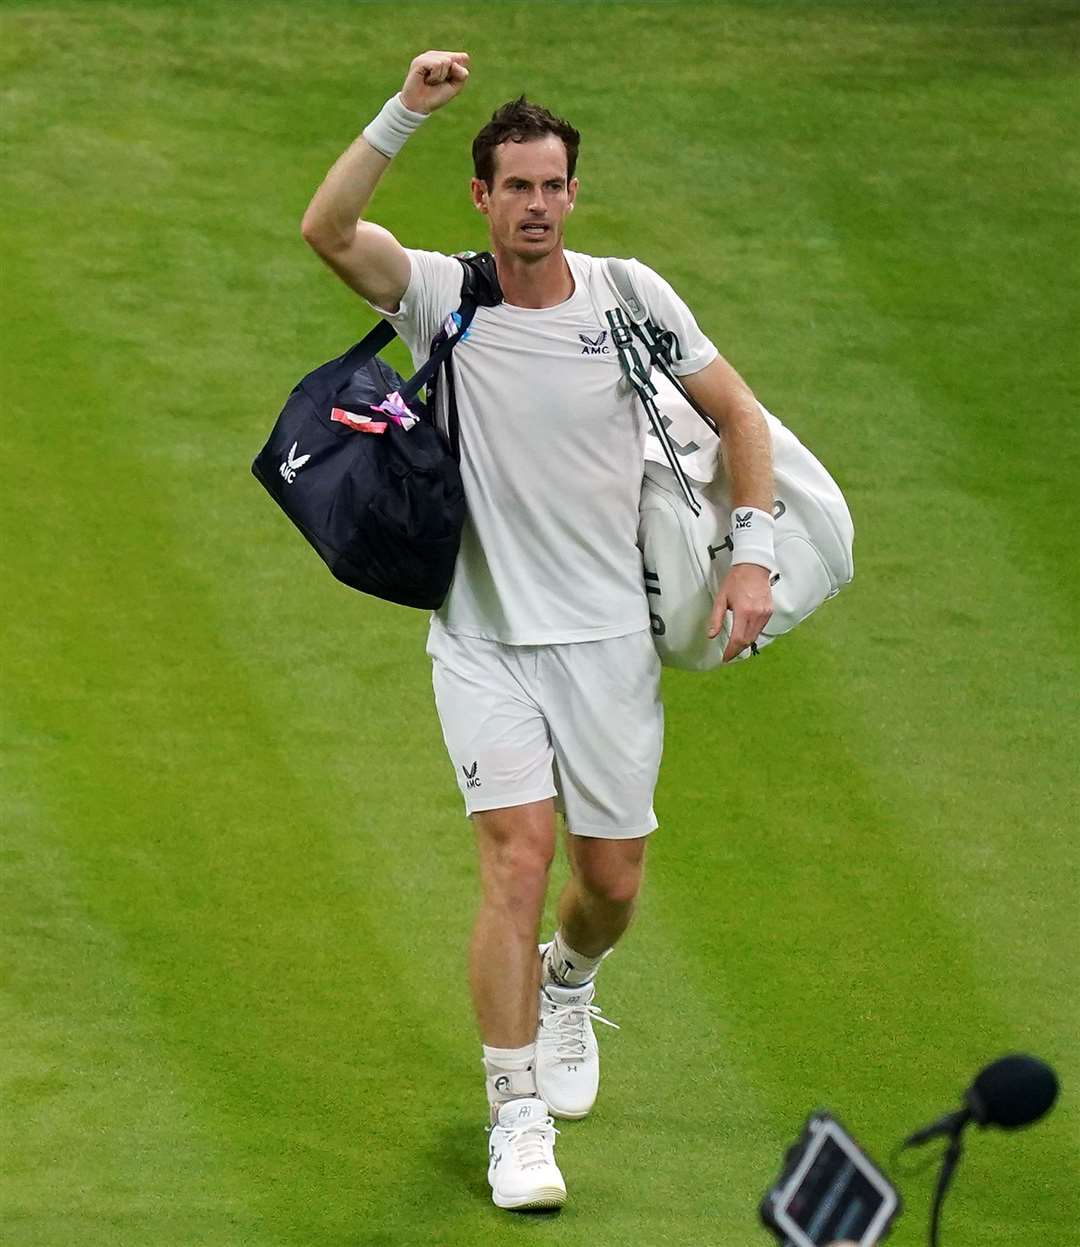 Sir Andy Murray acknowledges the crowd after his match against Stefanos Tsitsipas was suspended (John Walton/PA)